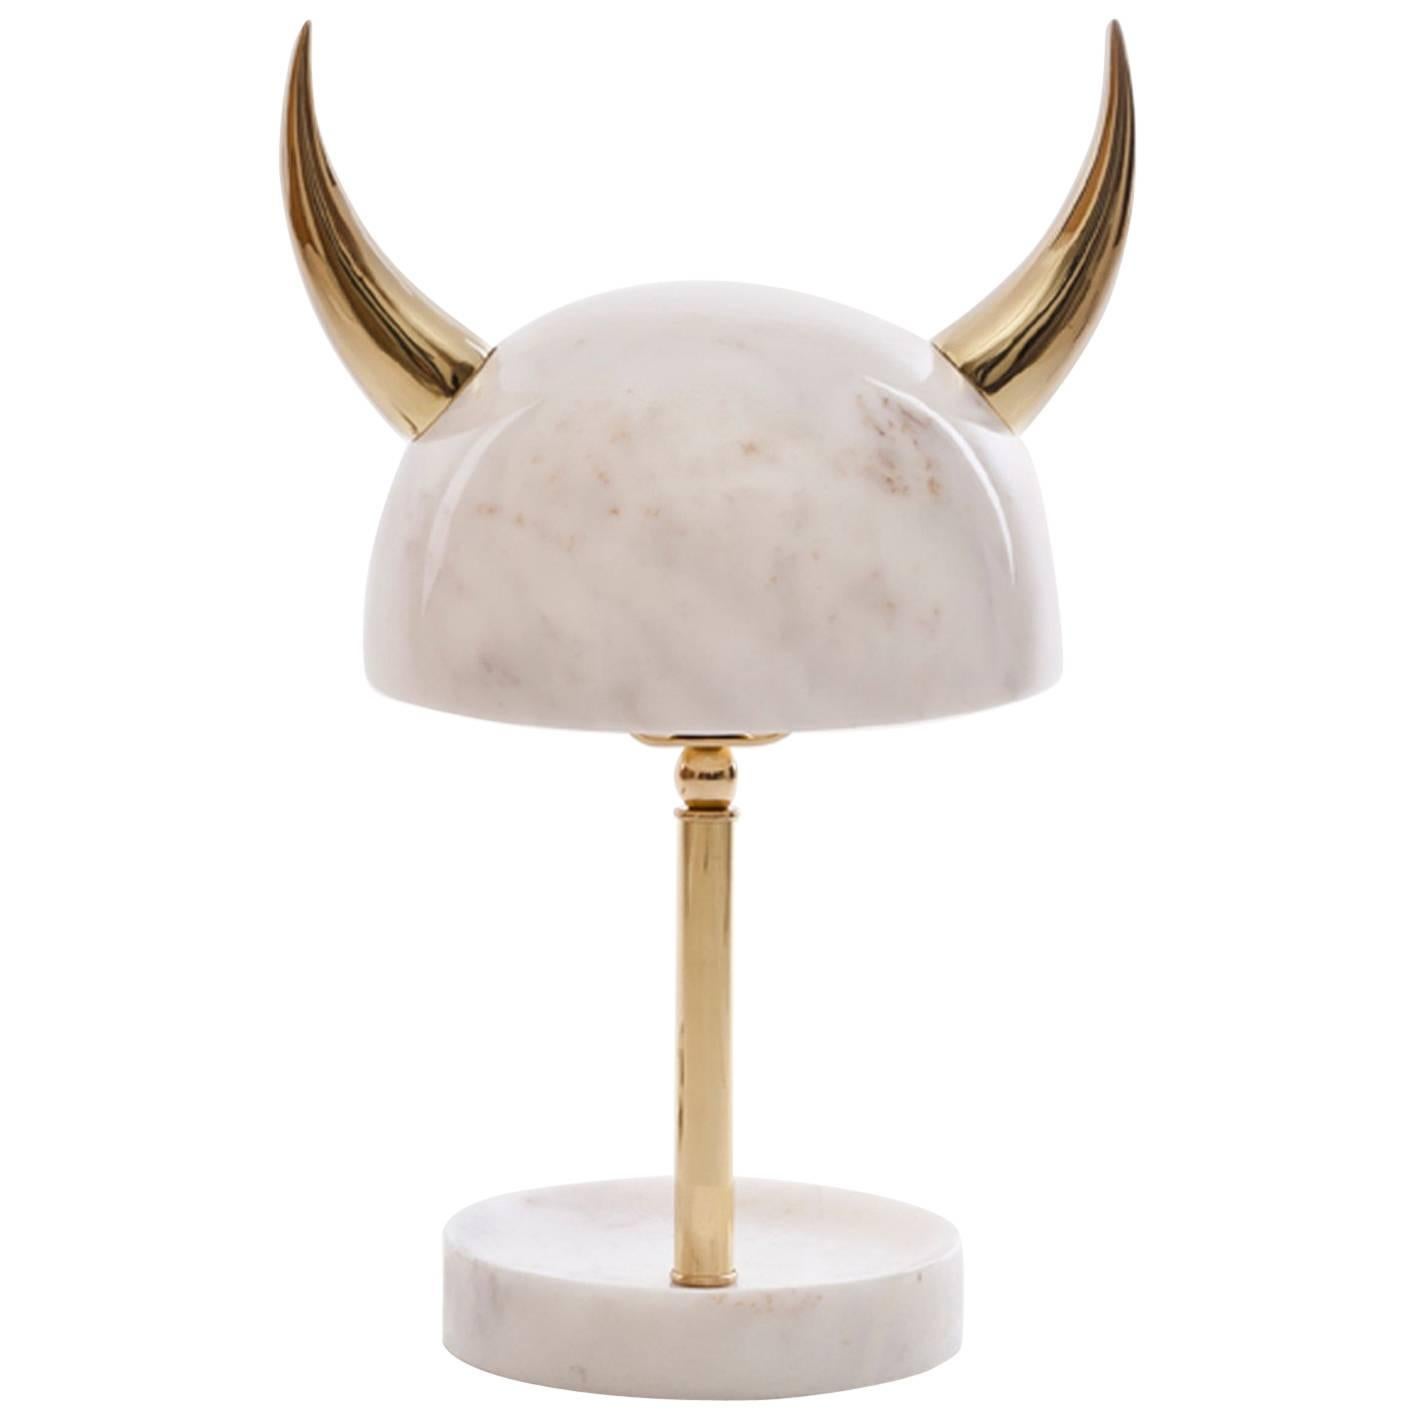 Min Lilla Viking Afyon Marble Table Lamp with Polished Brass Horns